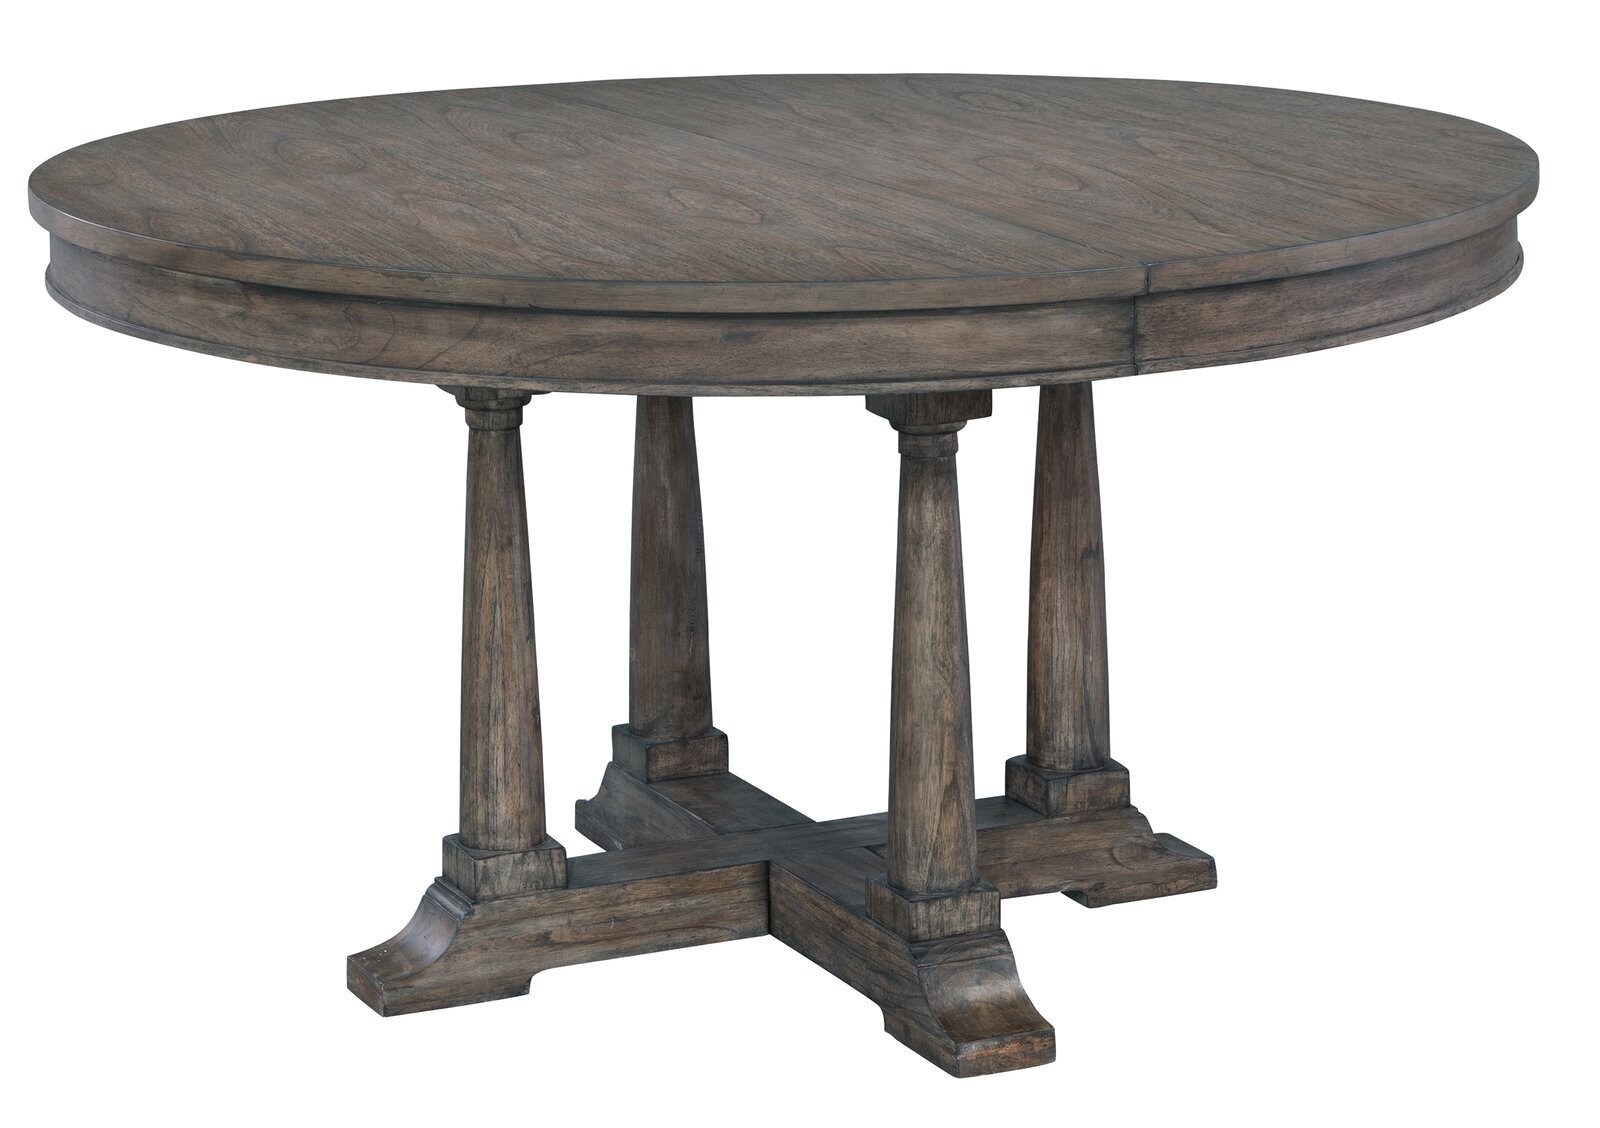 Giant Round Table With a Rustic Finish